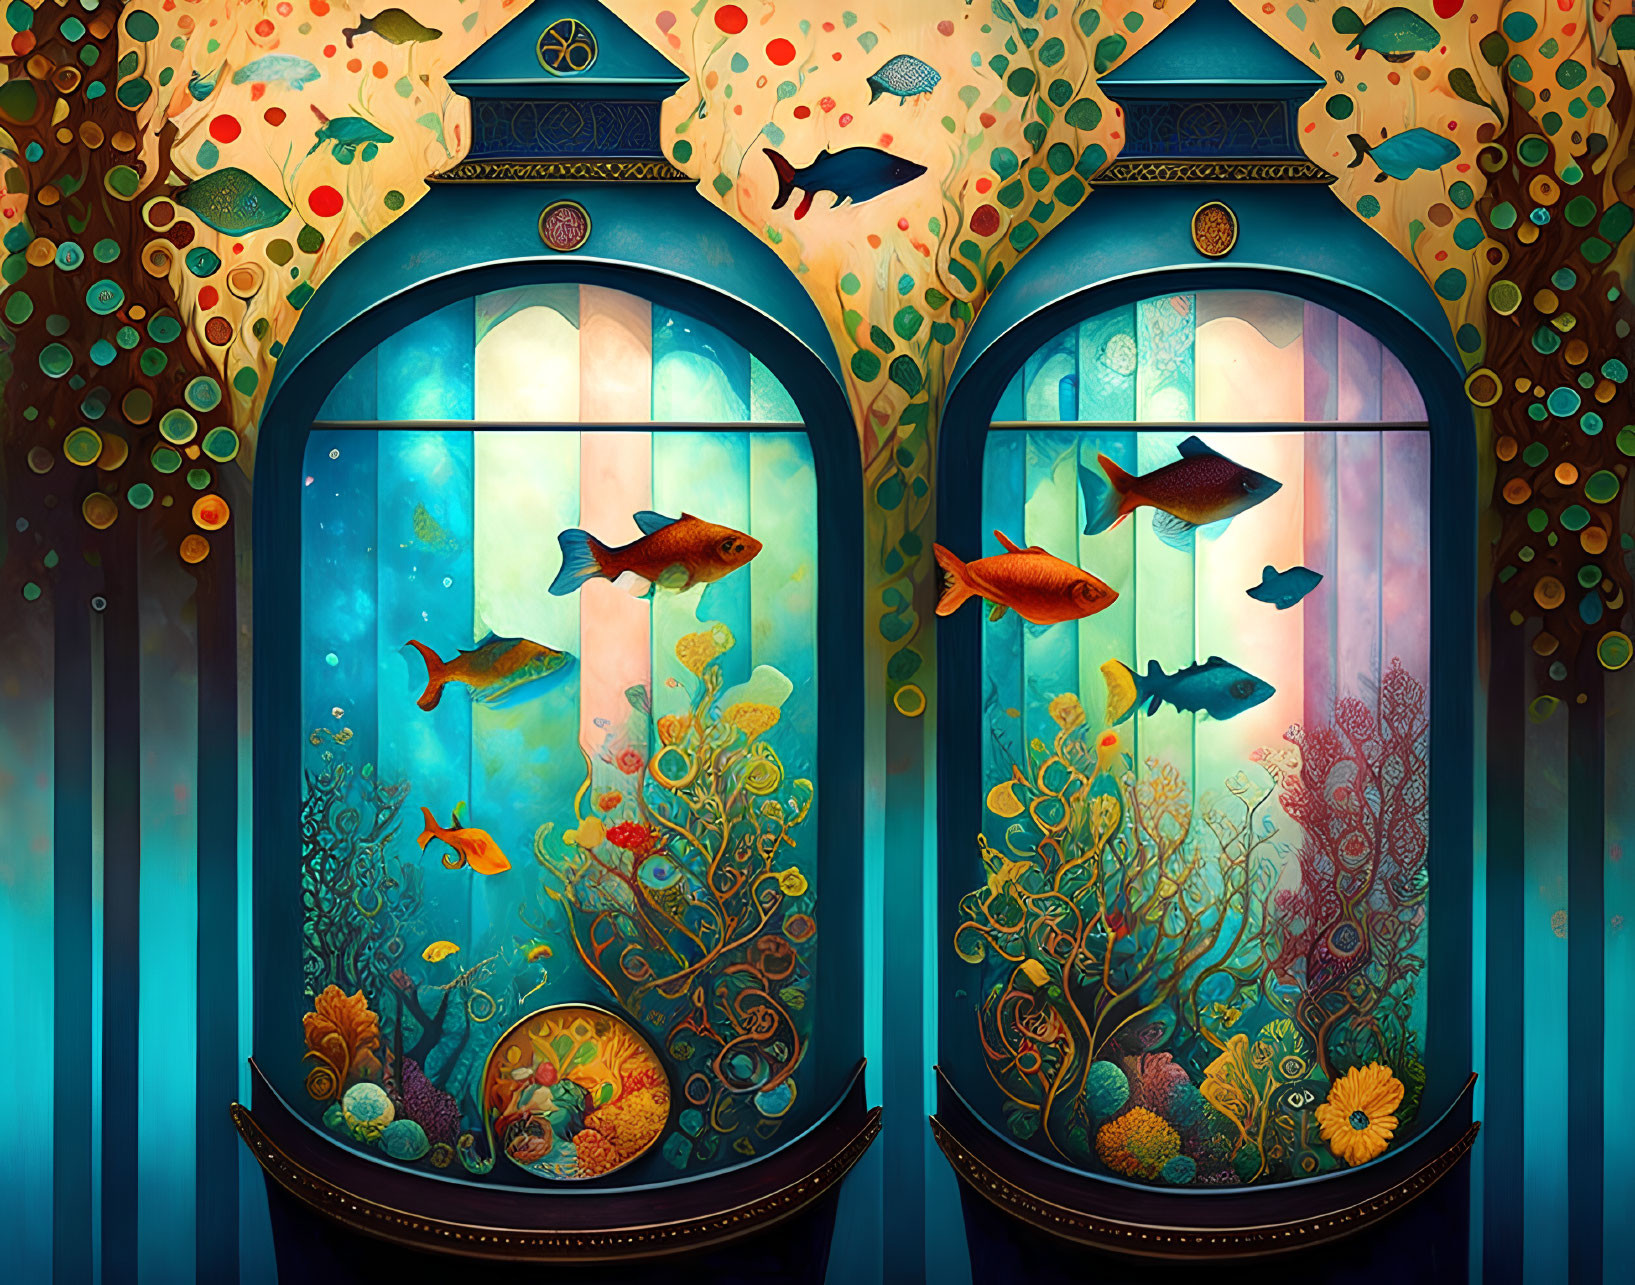 Ornate arch-topped aquariums with vibrant fish and coral in whimsical nature backdrop